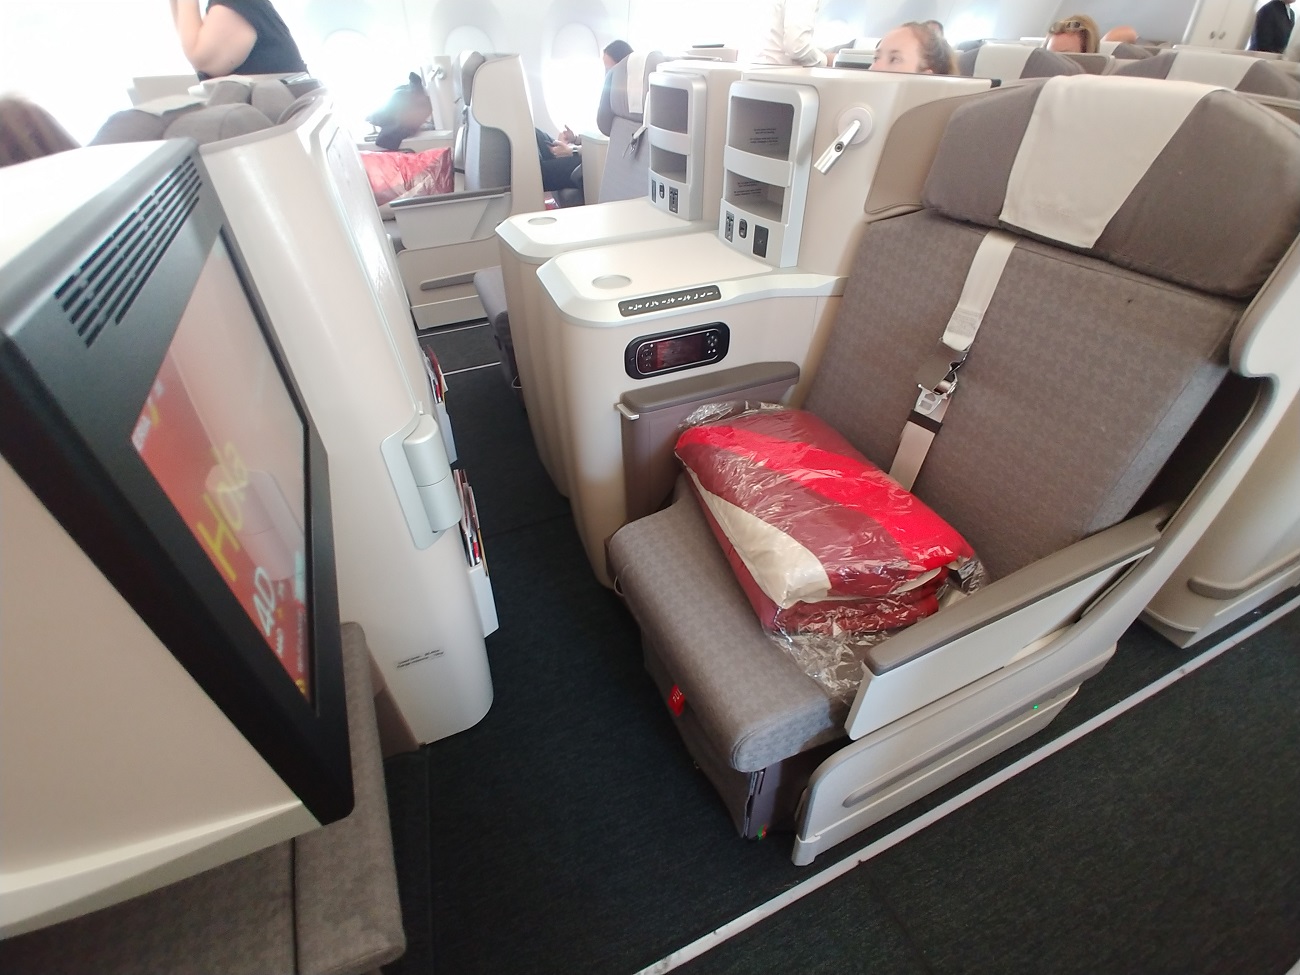 [Confirmed for USA residents] WOW: 17K Business class to/from Europe on Iberia through March 2021